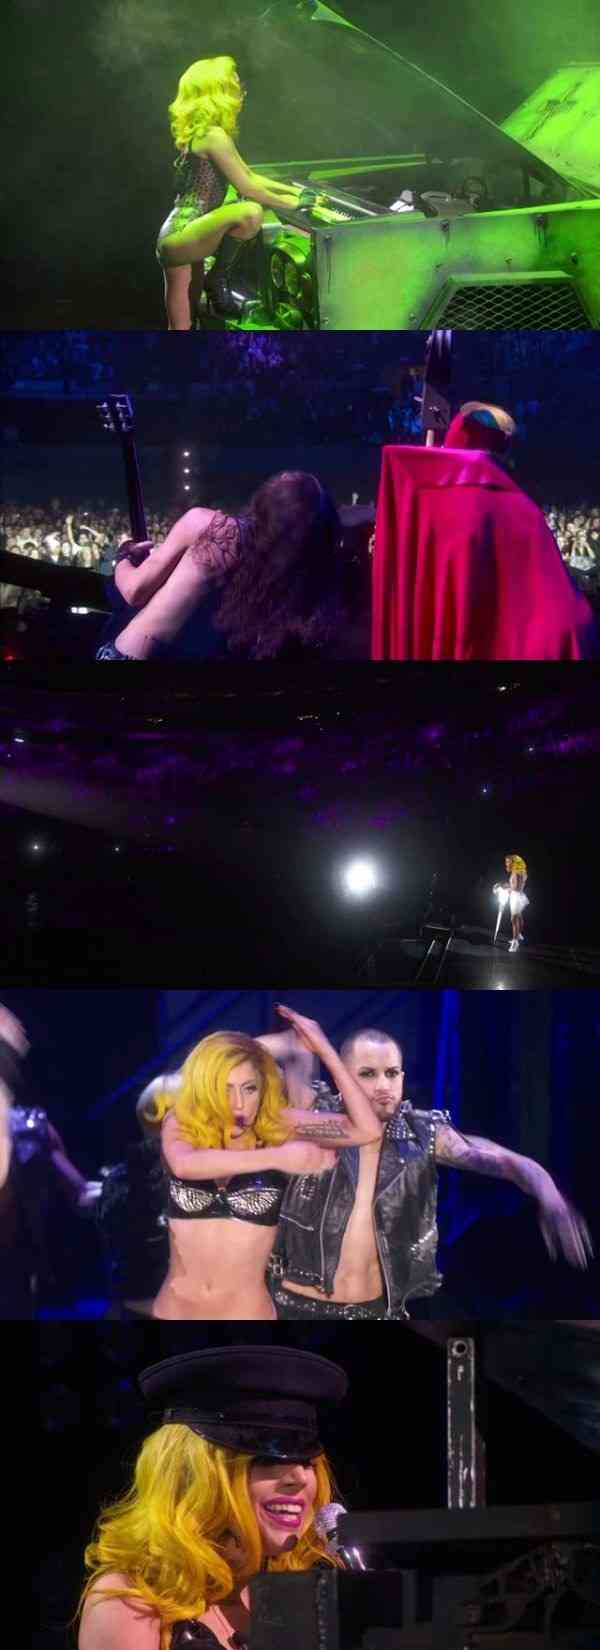 "Lady Gaga Presents The Monster Ball Tour At Madison Square Garde "